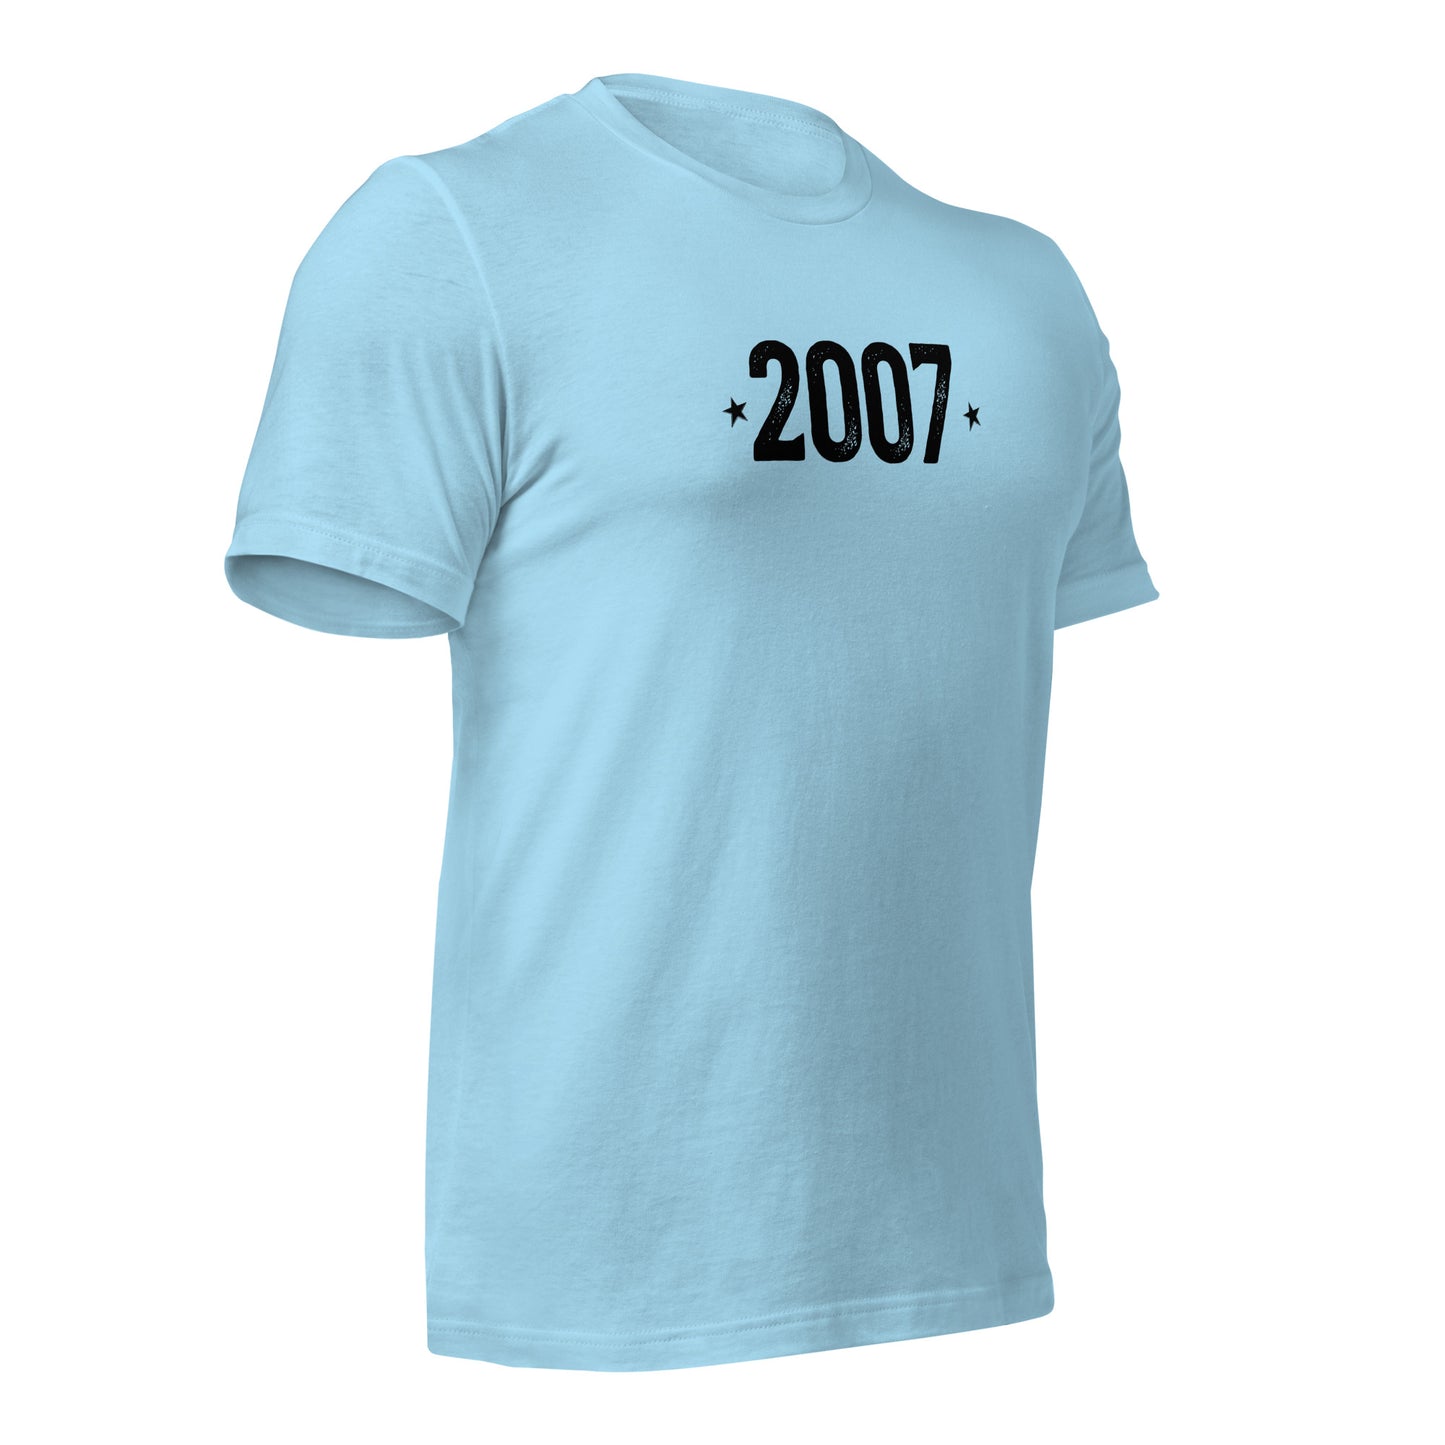 "2007" T-Shirt - Weave Got Gifts - Unique Gifts You Won’t Find Anywhere Else!